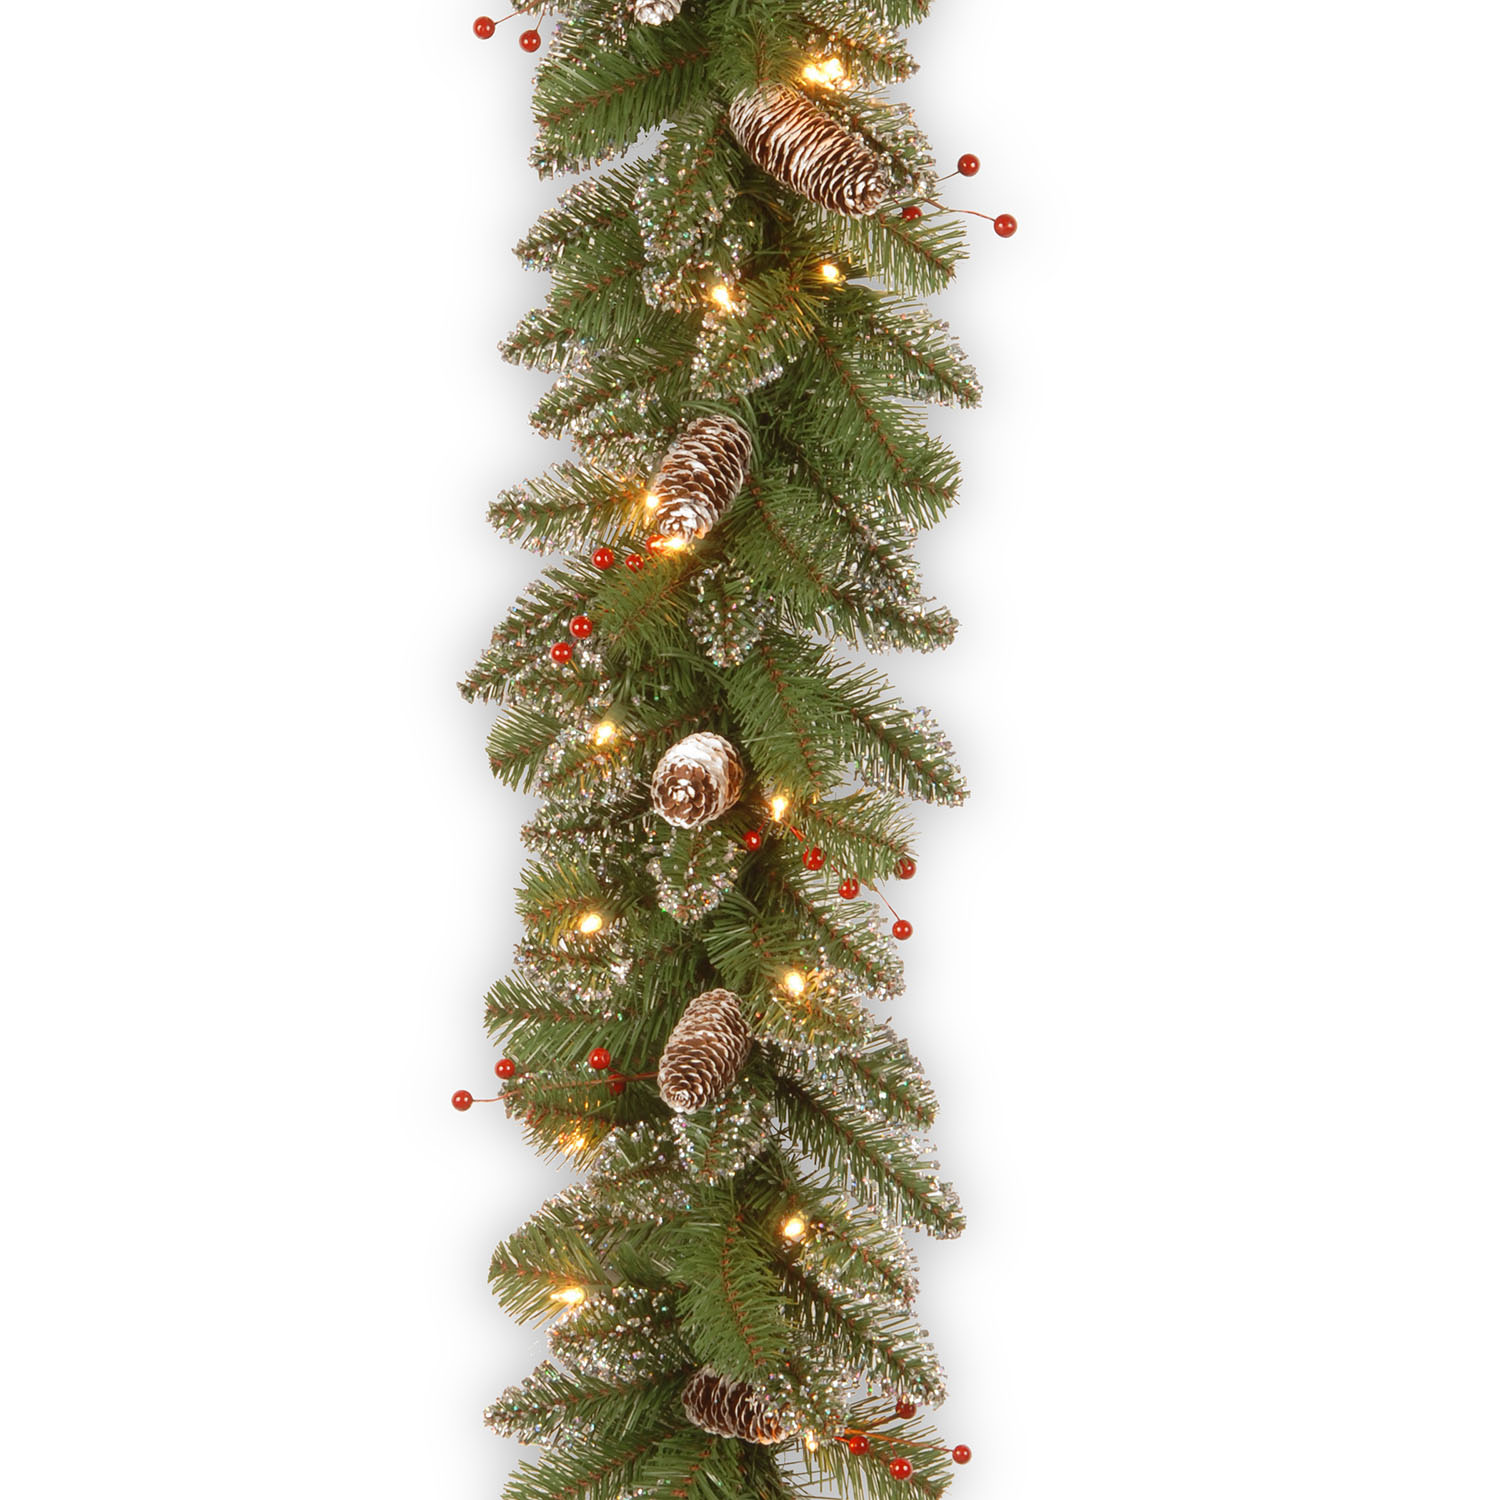 9 Foot X 10 Inch Glittery Mountain Spruce Garland: Cones/berries/lights